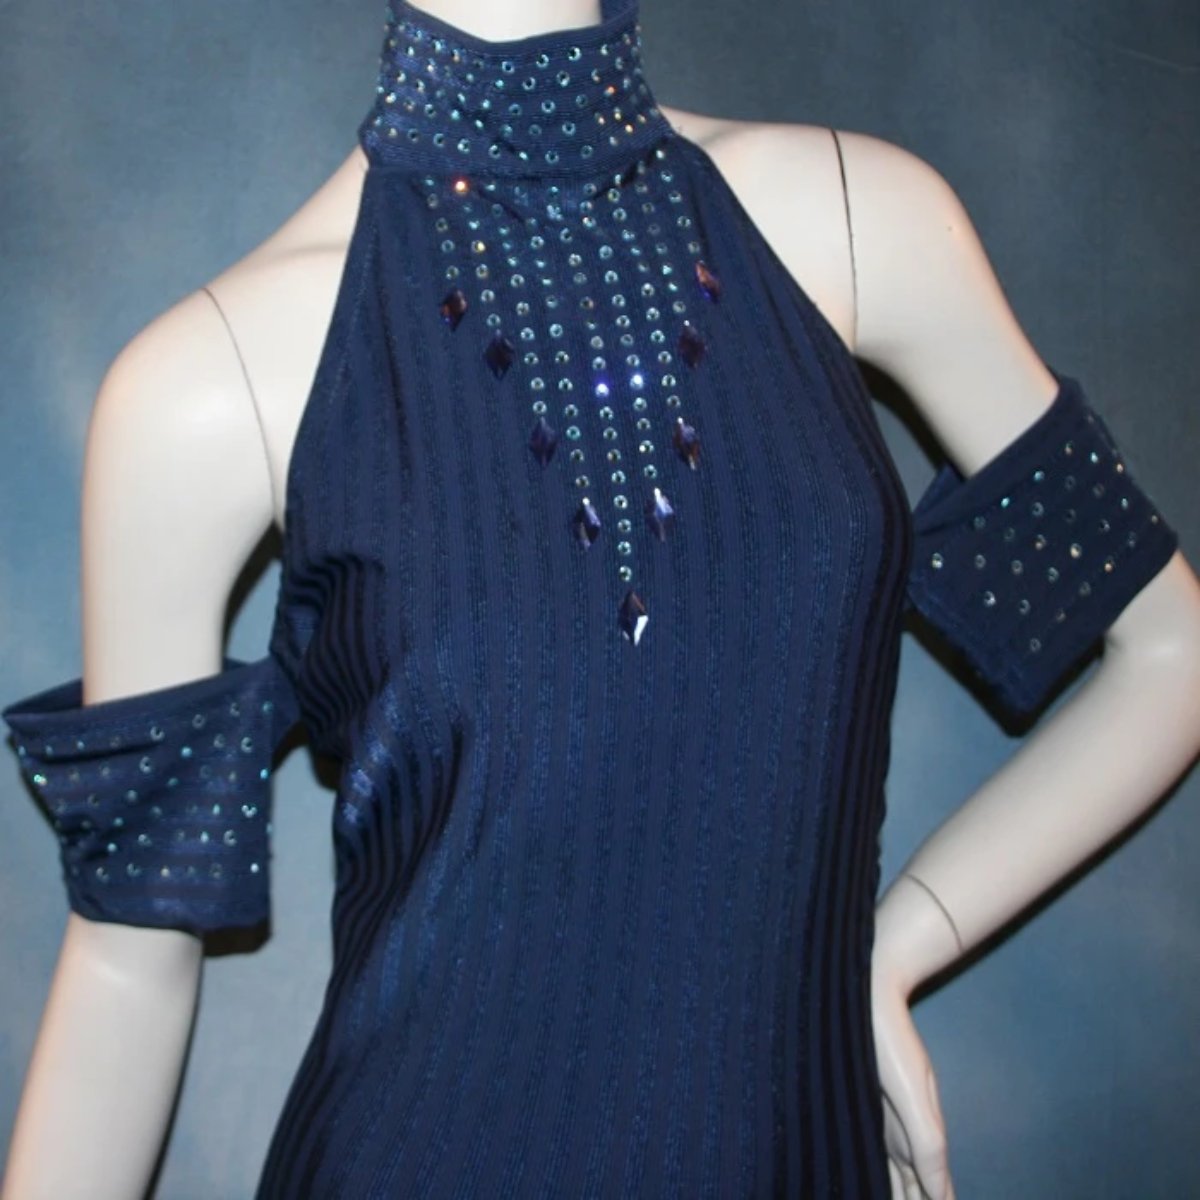 close upper view of Navy blue tango dress or Latin/rhythm dress created in rib textured lycra, with flounces of barcelona lace, adorned with light sapphire Swarovski rhinestones & larger navy lucite gems.